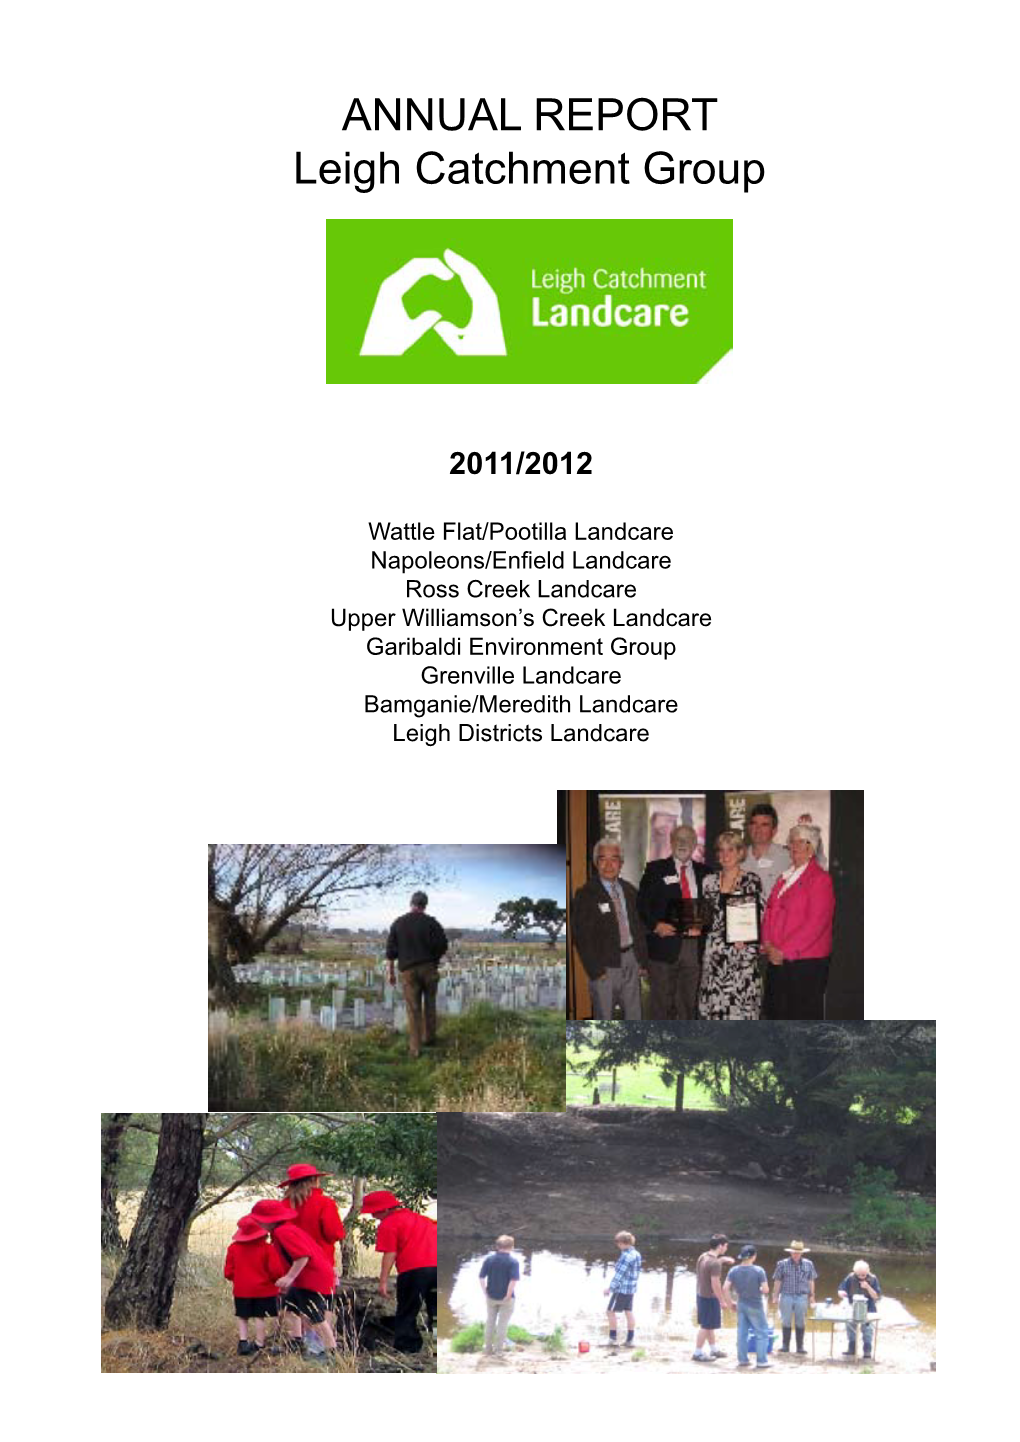 ANNUAL REPORT Leigh Catchment Group